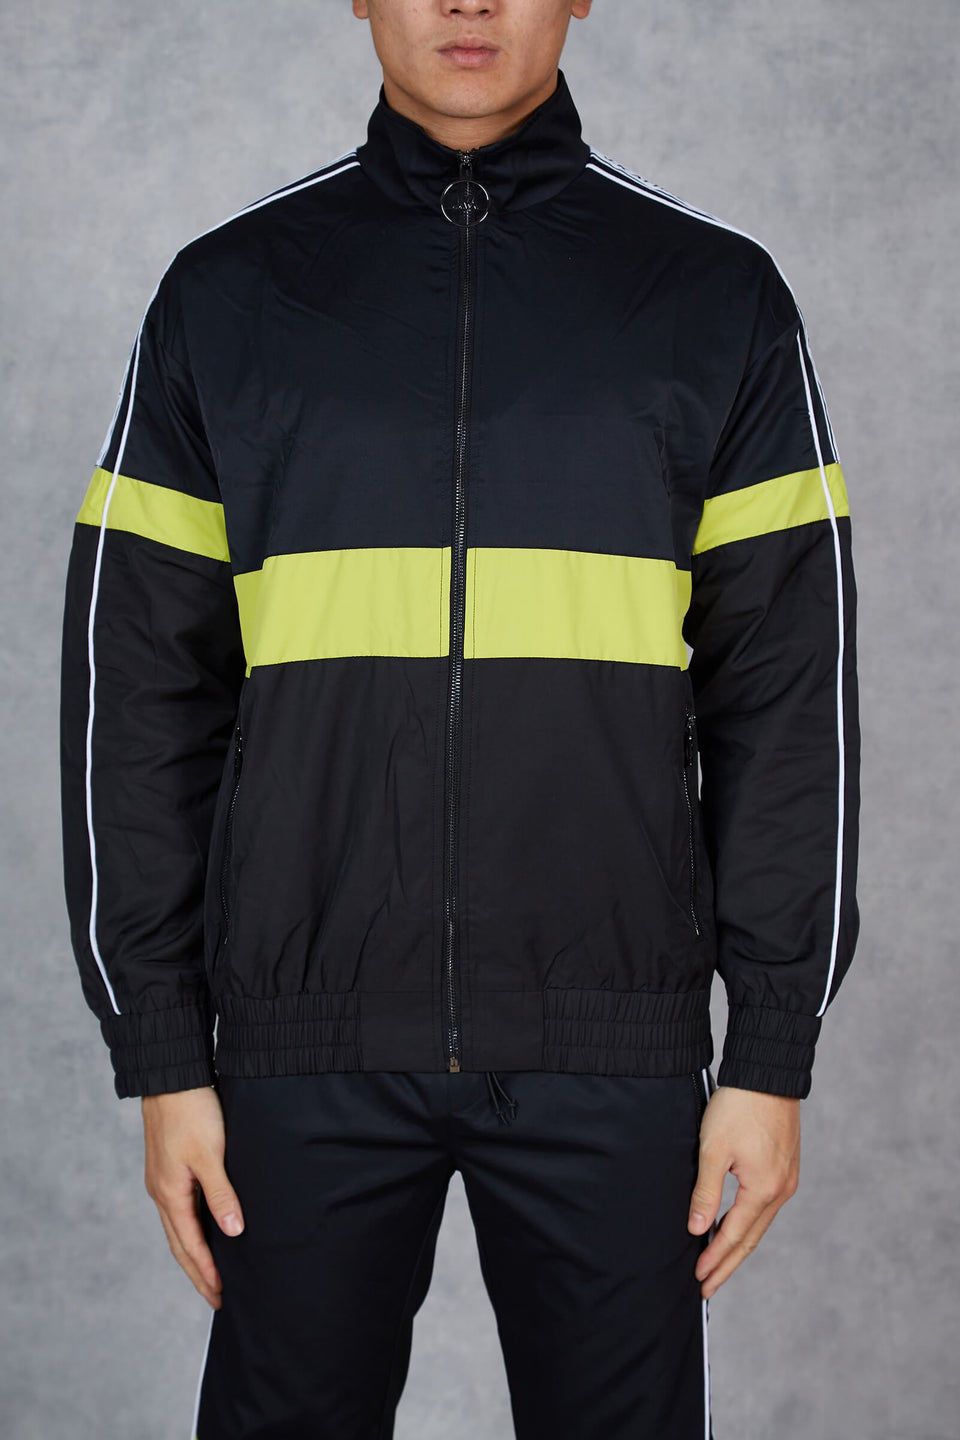 Section Retro Taped Tracksuit Jacket - Neon/Black